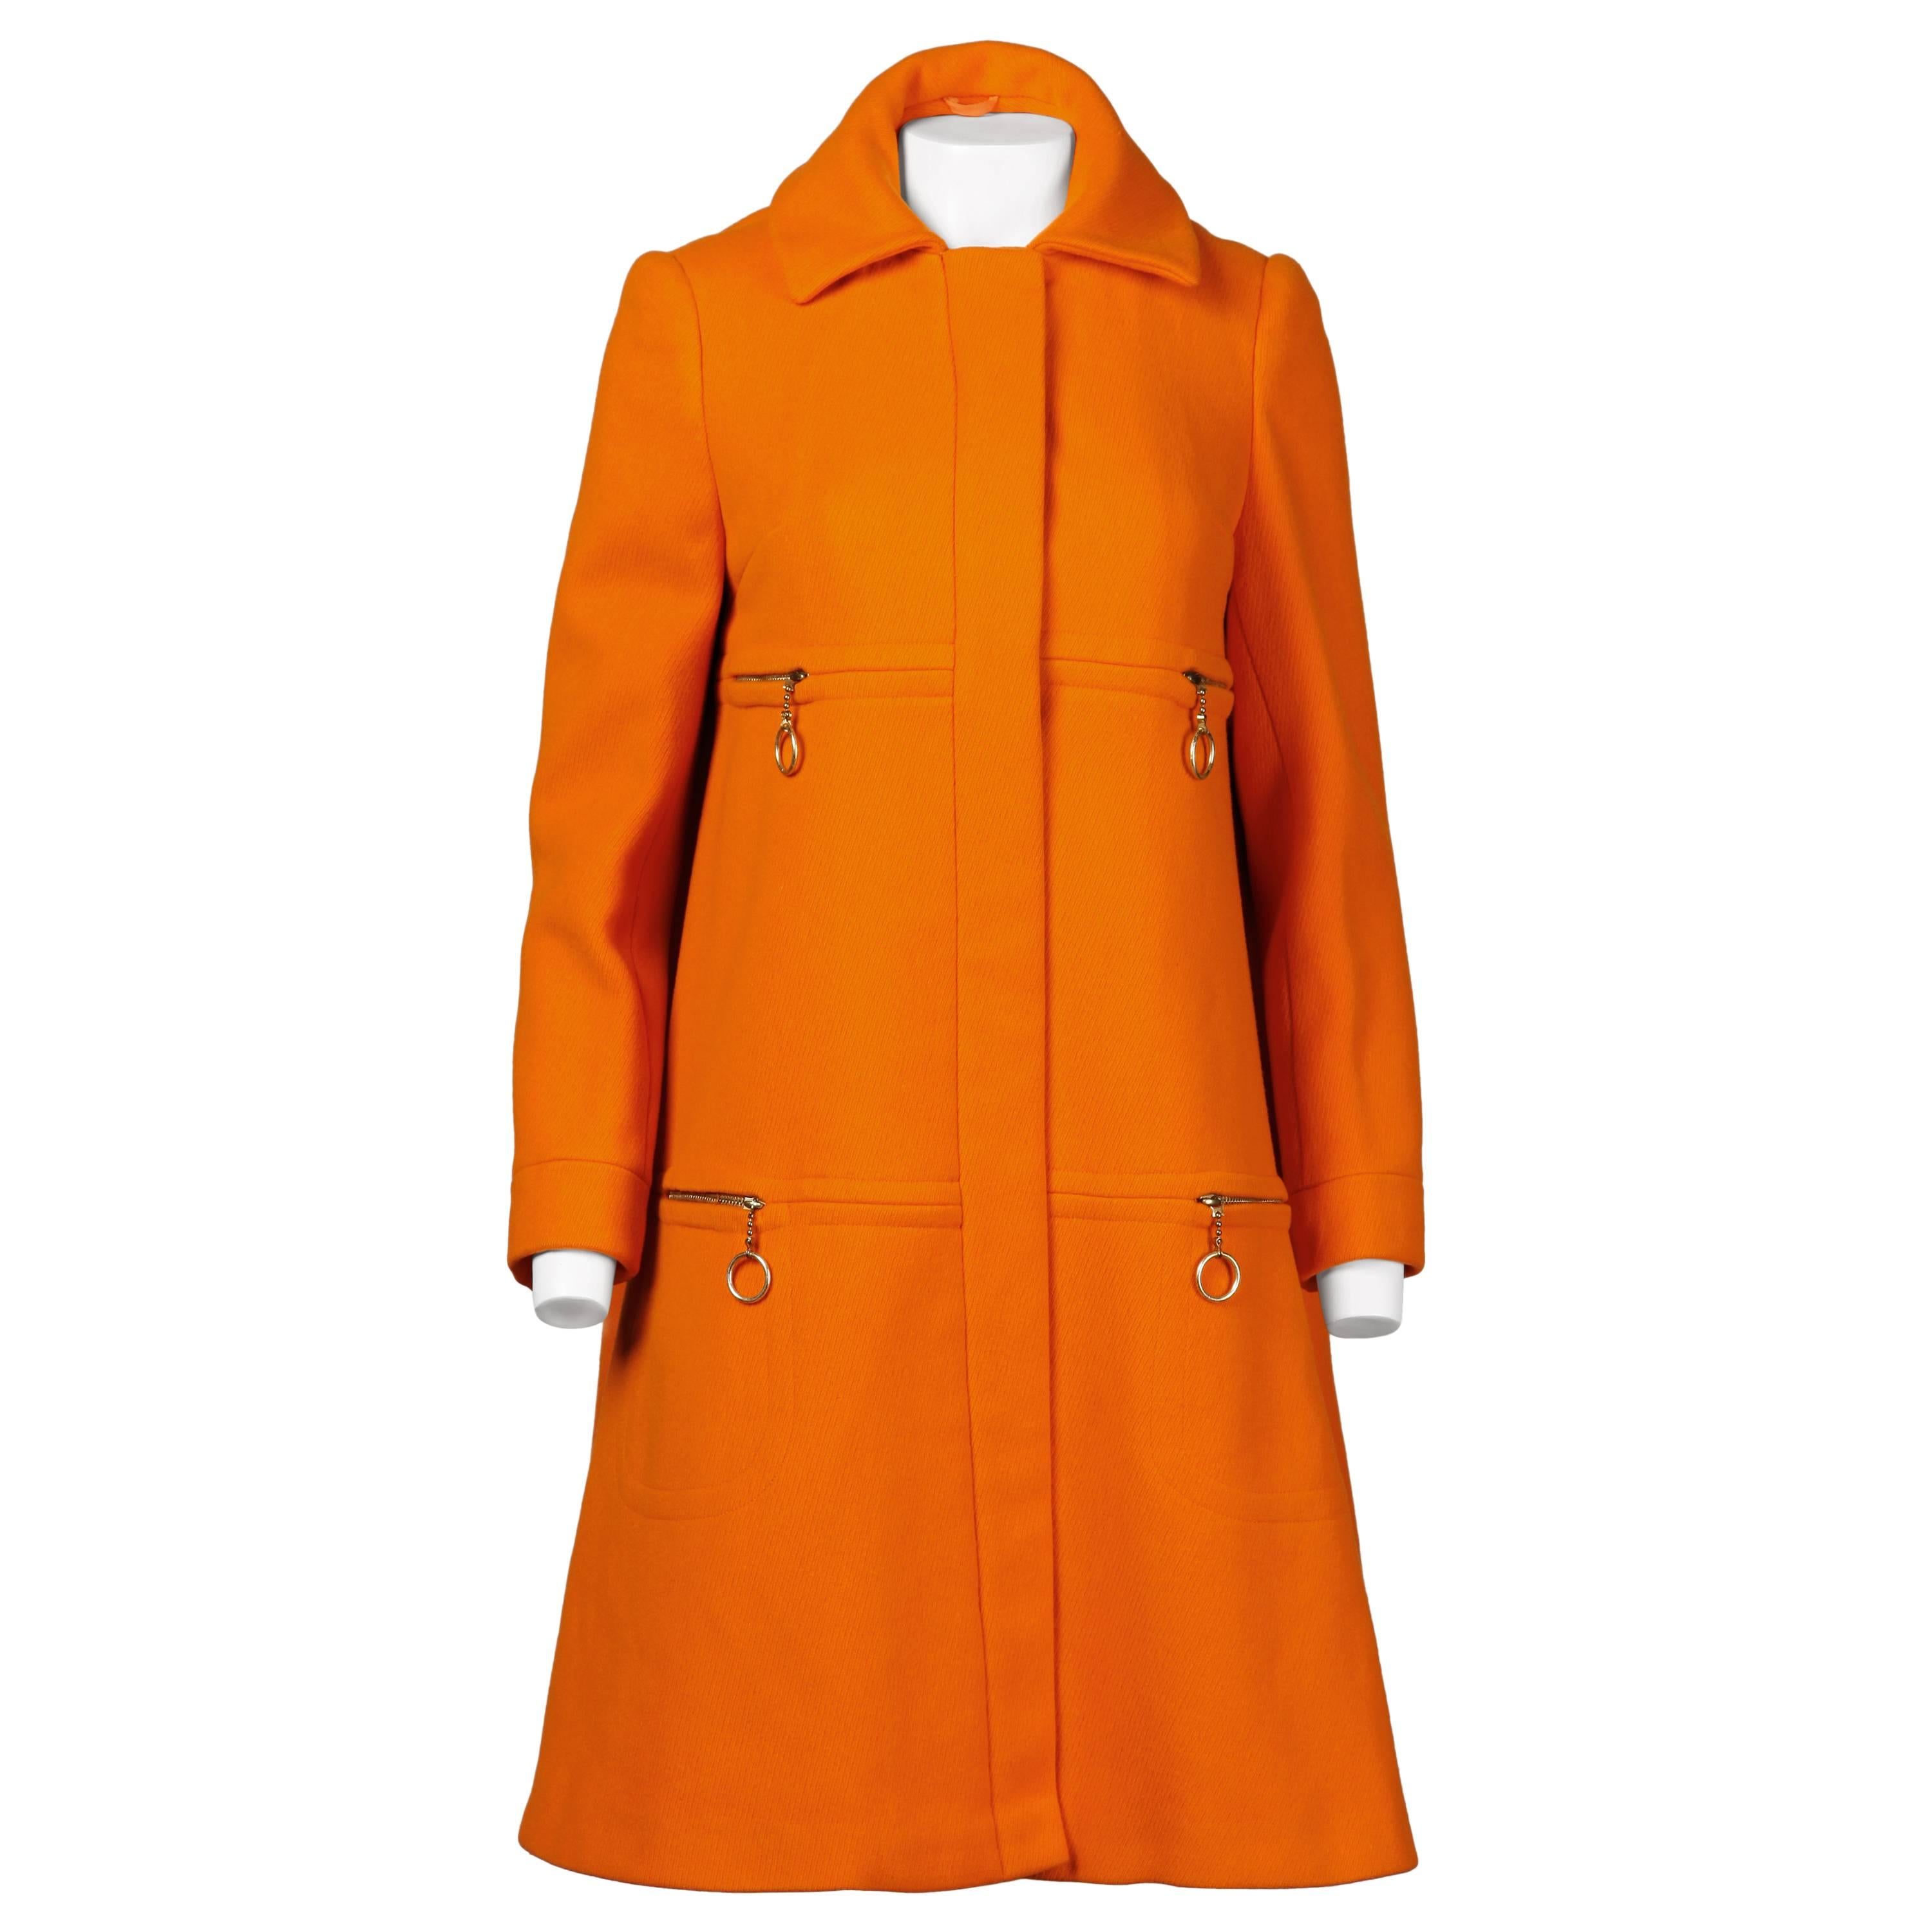 Mary Quant Vintage 1960s Mod Orange Wool Trapeze Swing Coat with Ring Pulls